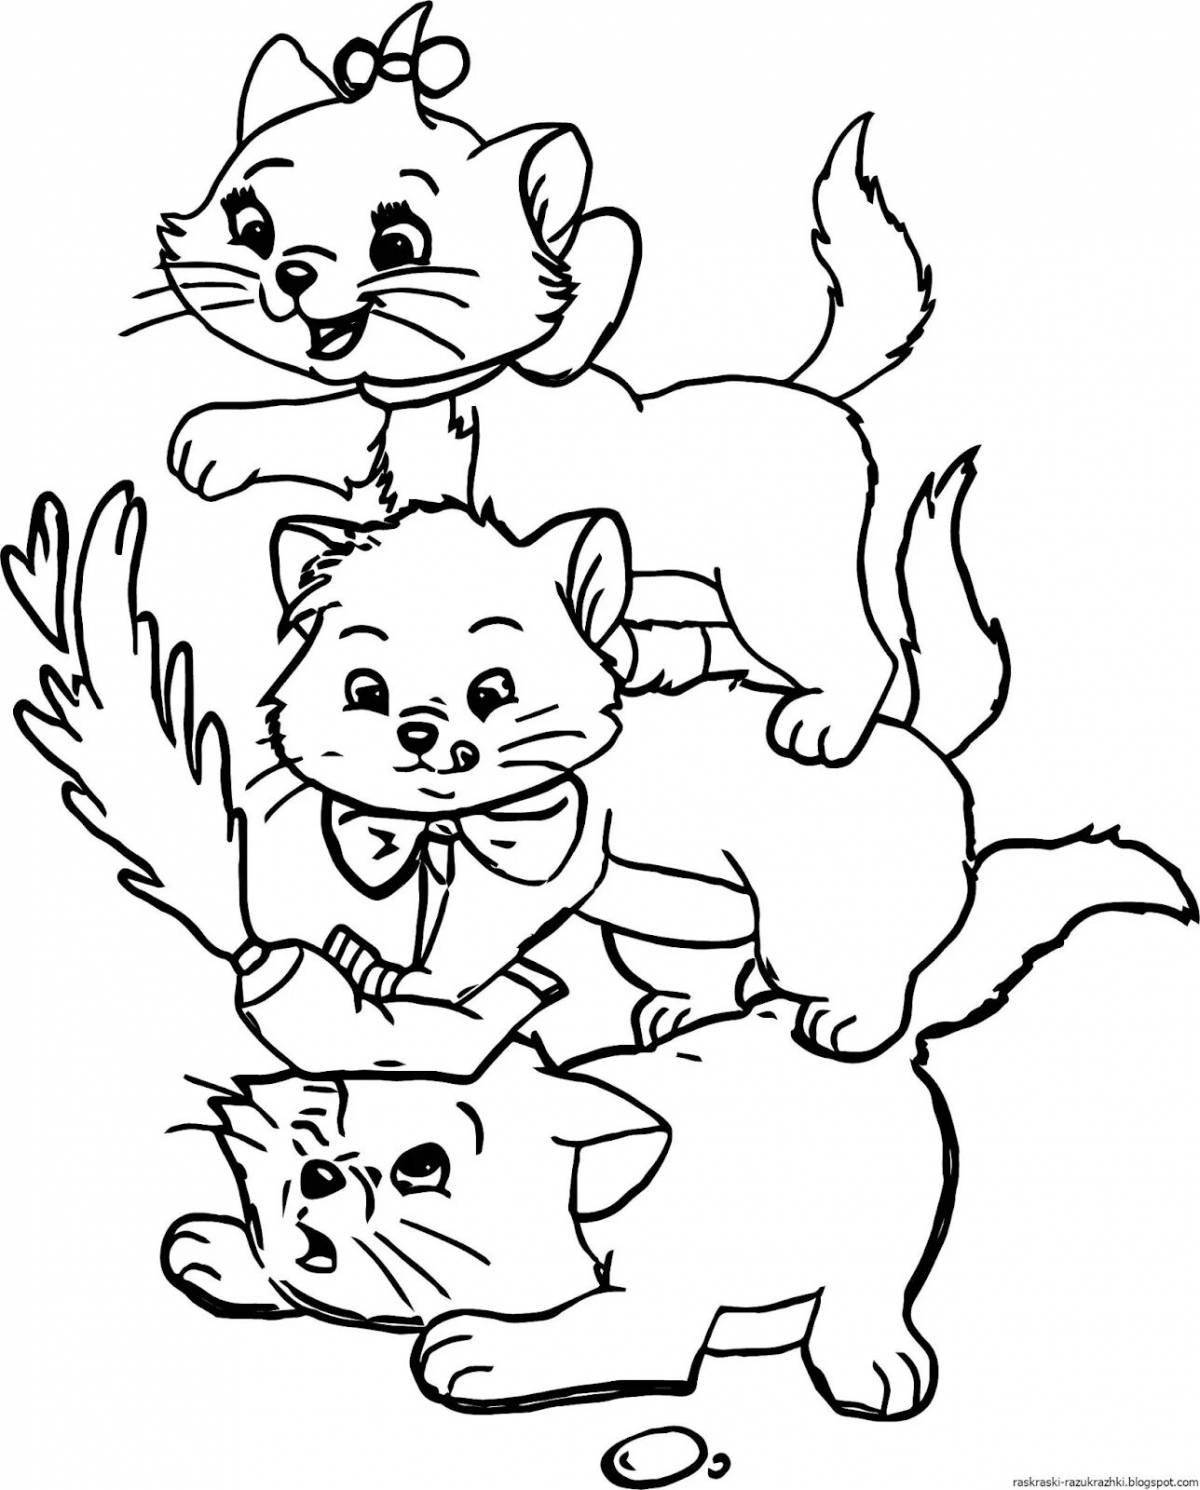 Funny coloring pages kittens with dogs for children 3 4 years old